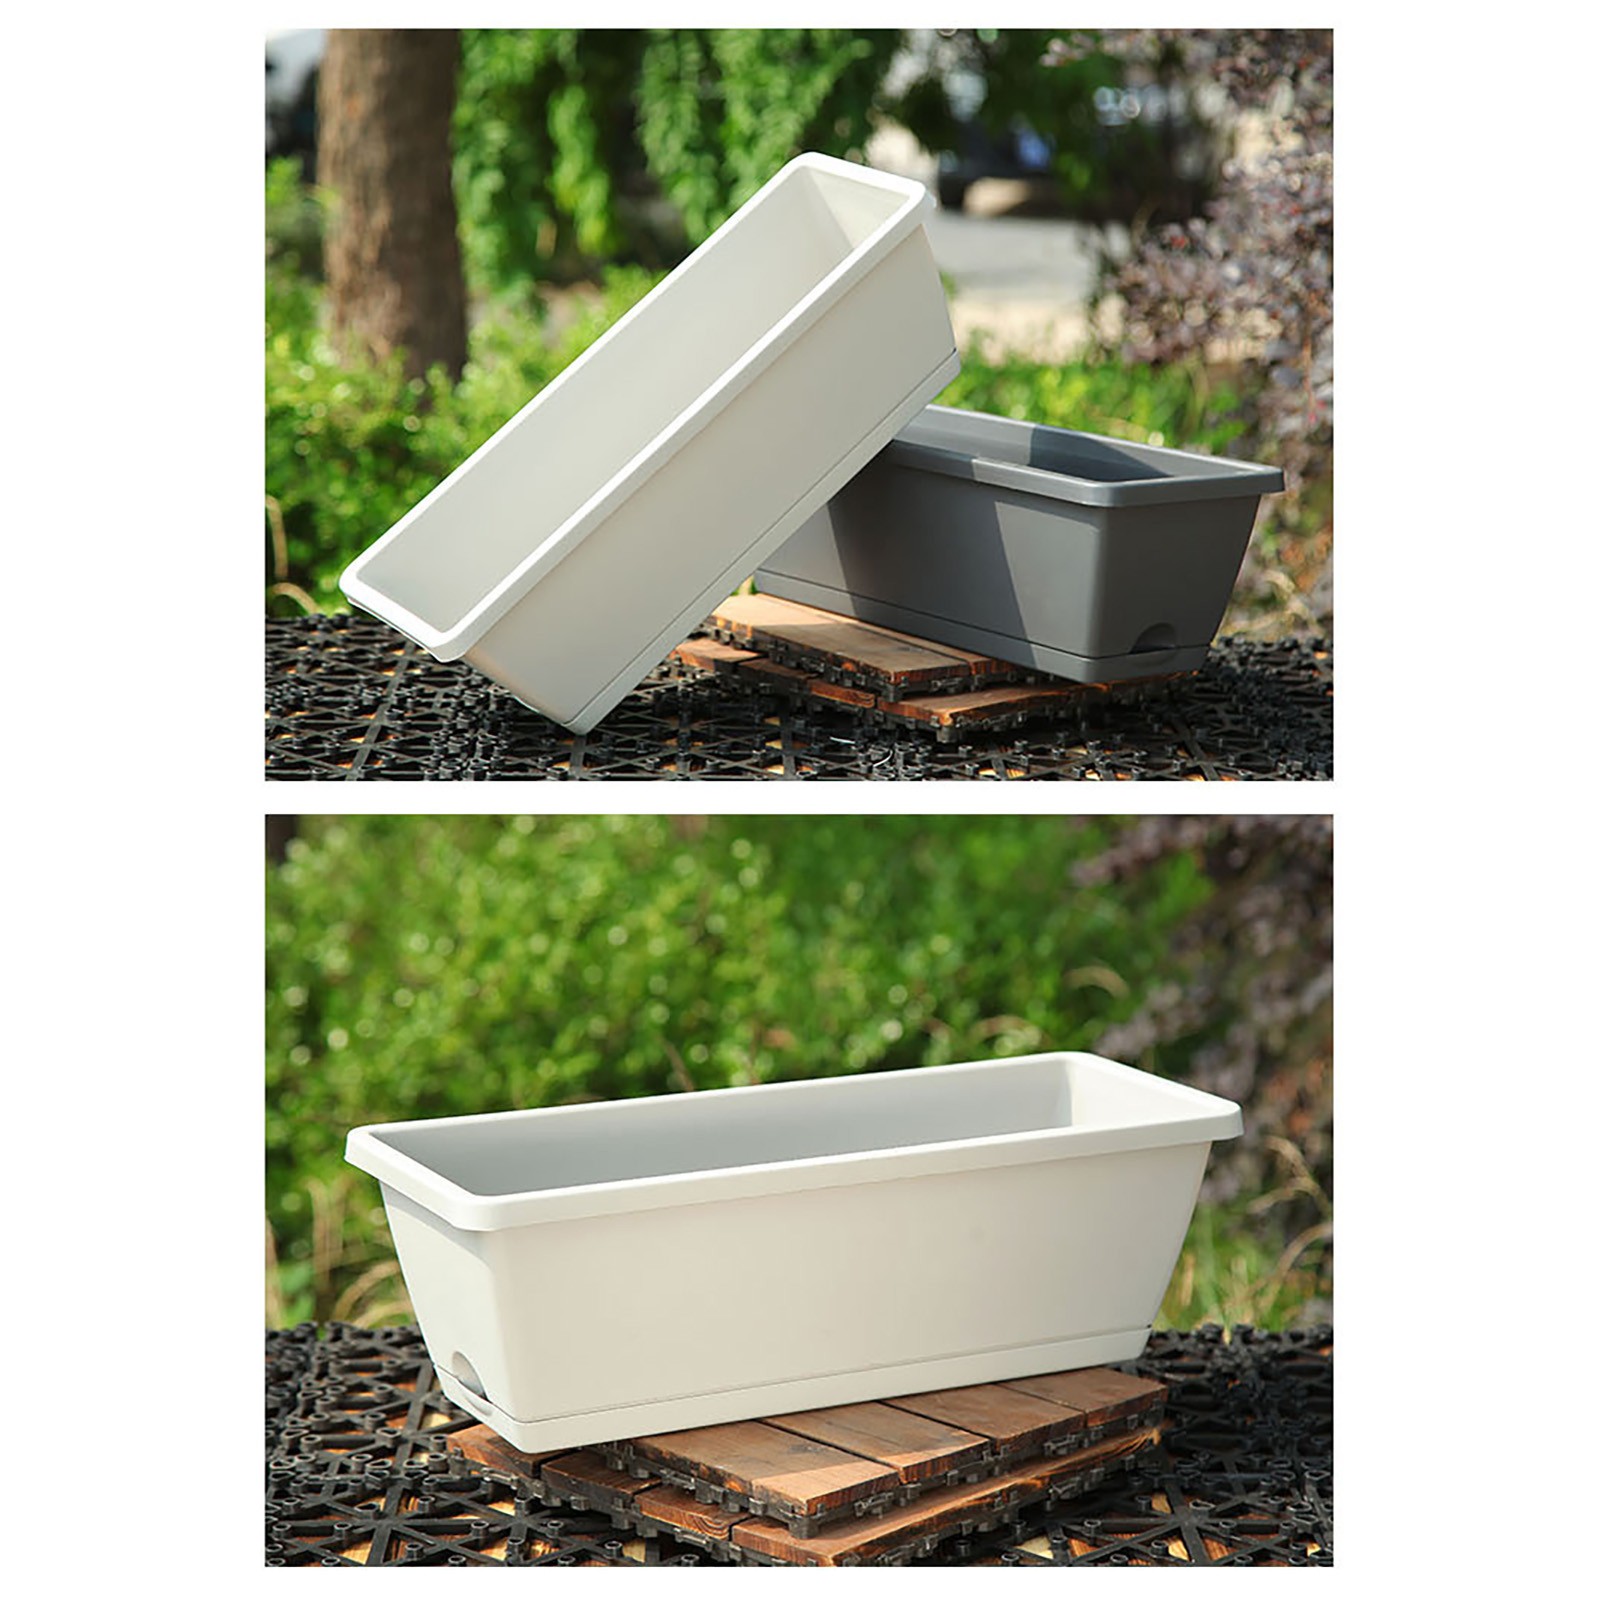 Wovilon Window Box Planter, Plastic Vegetable Flower Planters Boxes Rectangular Flower Pots with Saucers for Indoor Outdoor Garden, Patio, Home Decor - image 2 of 8